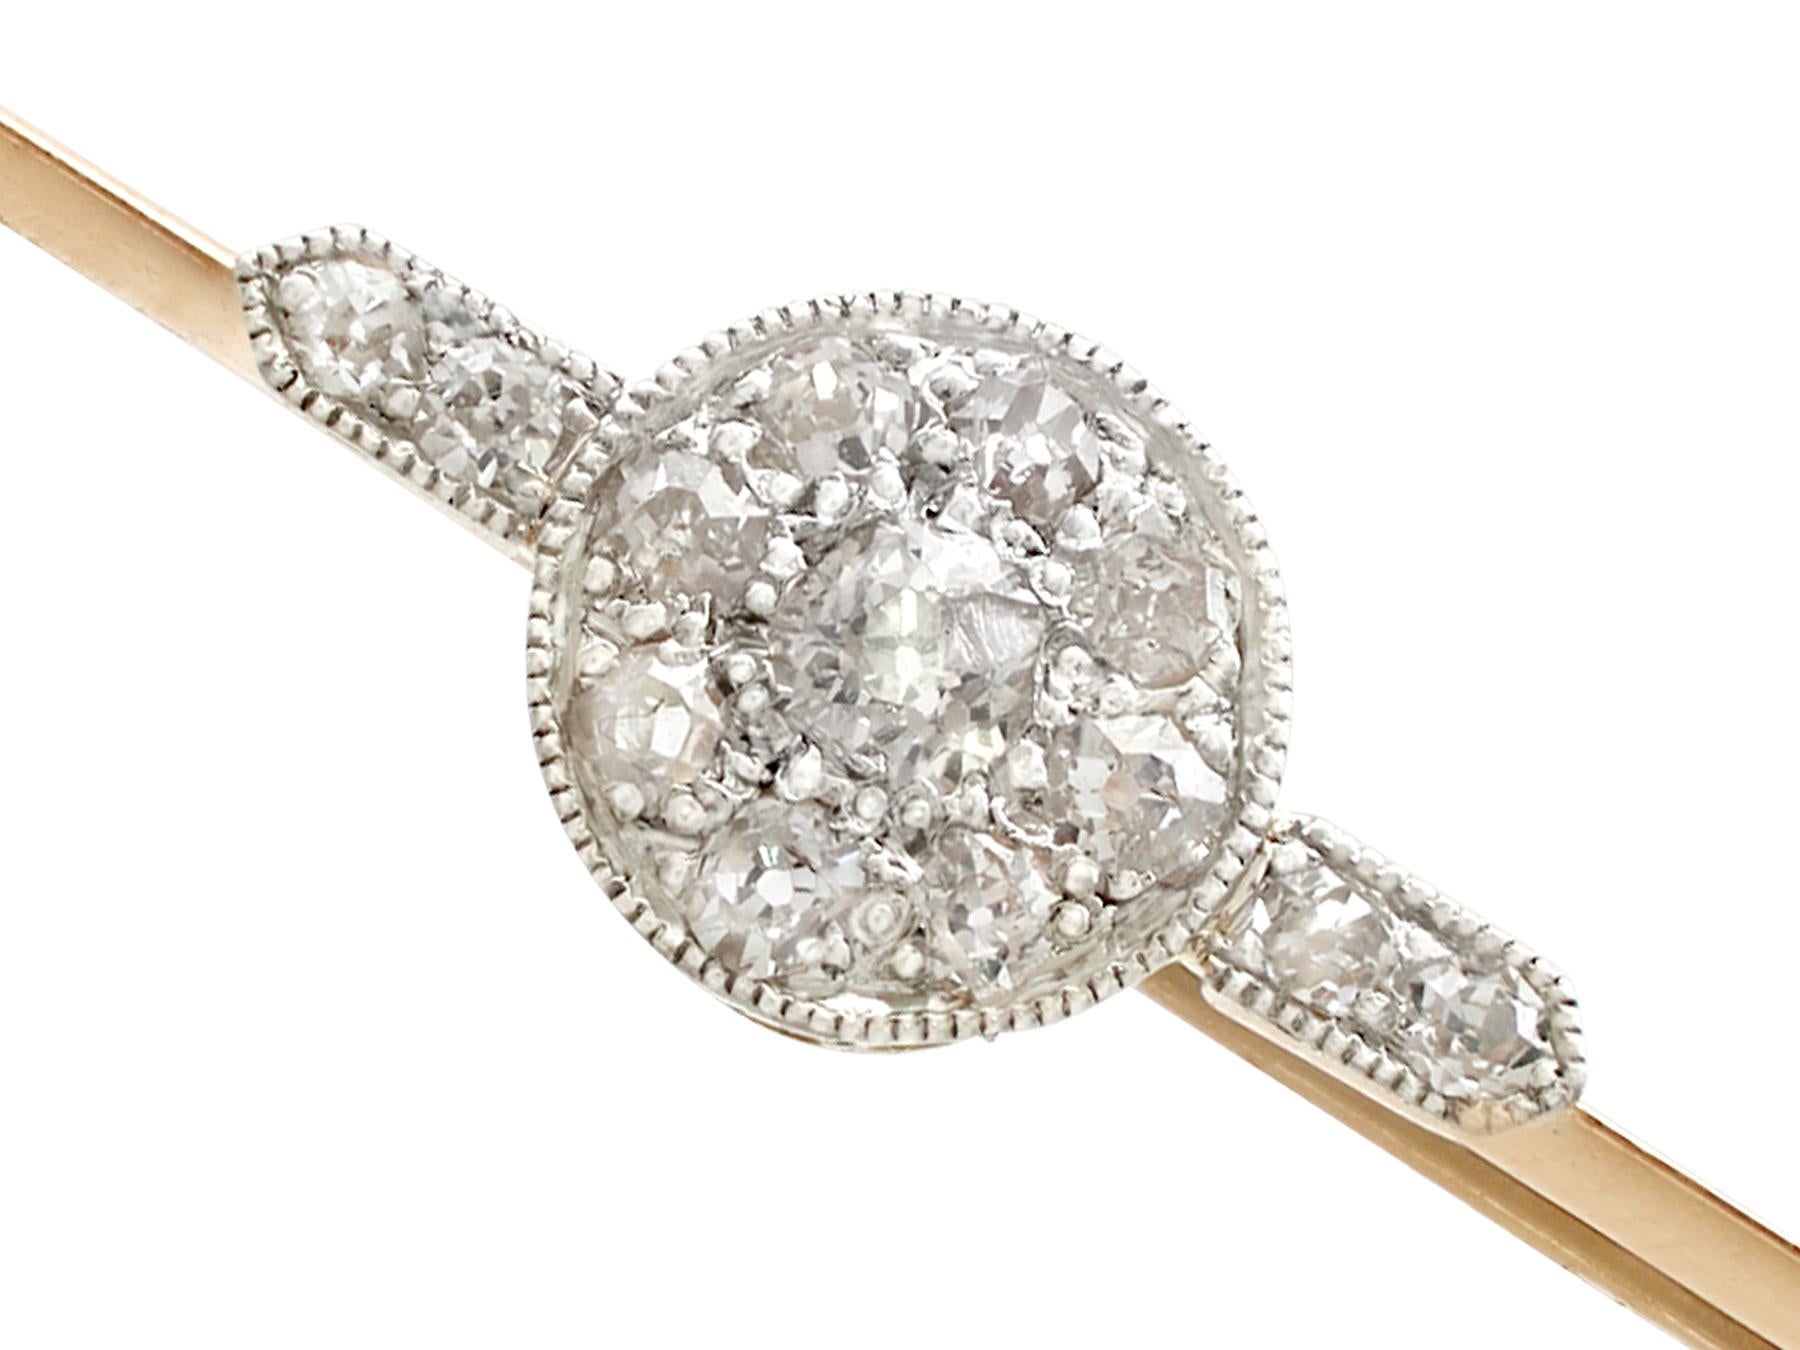 An impressive antique 0.43 carat diamond and 14 karat yellow gold, 14 karat white gold set bar brooch; part of our diverse antique jewelry and estate jewelry collections.

This fine and impressive diamond brooch has been crafted in 14k yellow gold